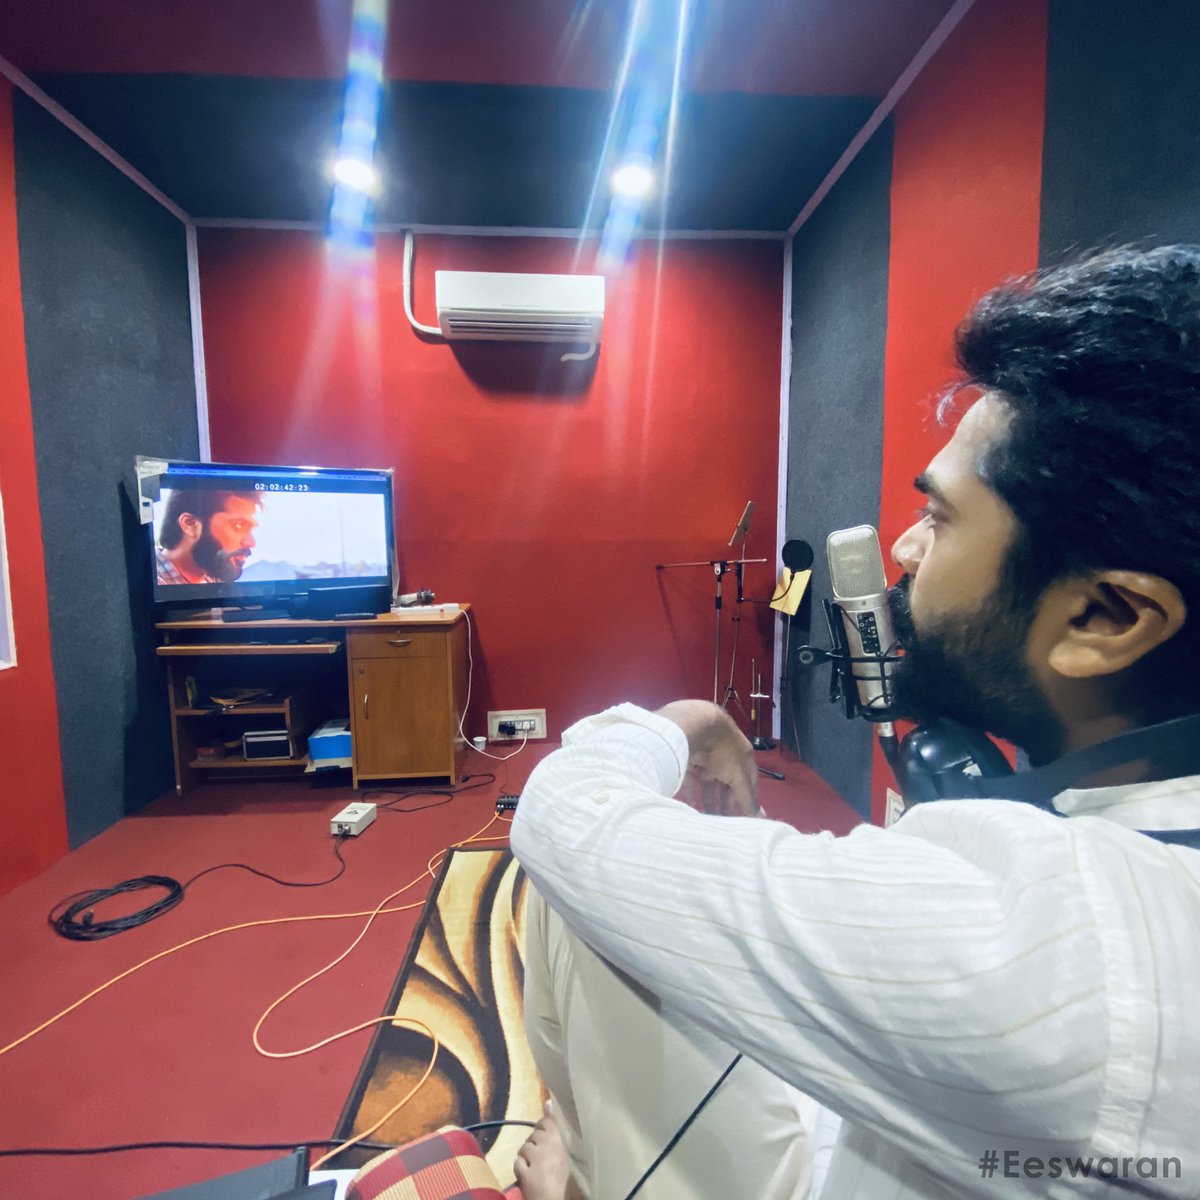 Finally done with #Dubbing for #Eeswaran 

#Thankful #Greatful & #TrulyBlessed 

#SilambarasanTR
#Atman #STR